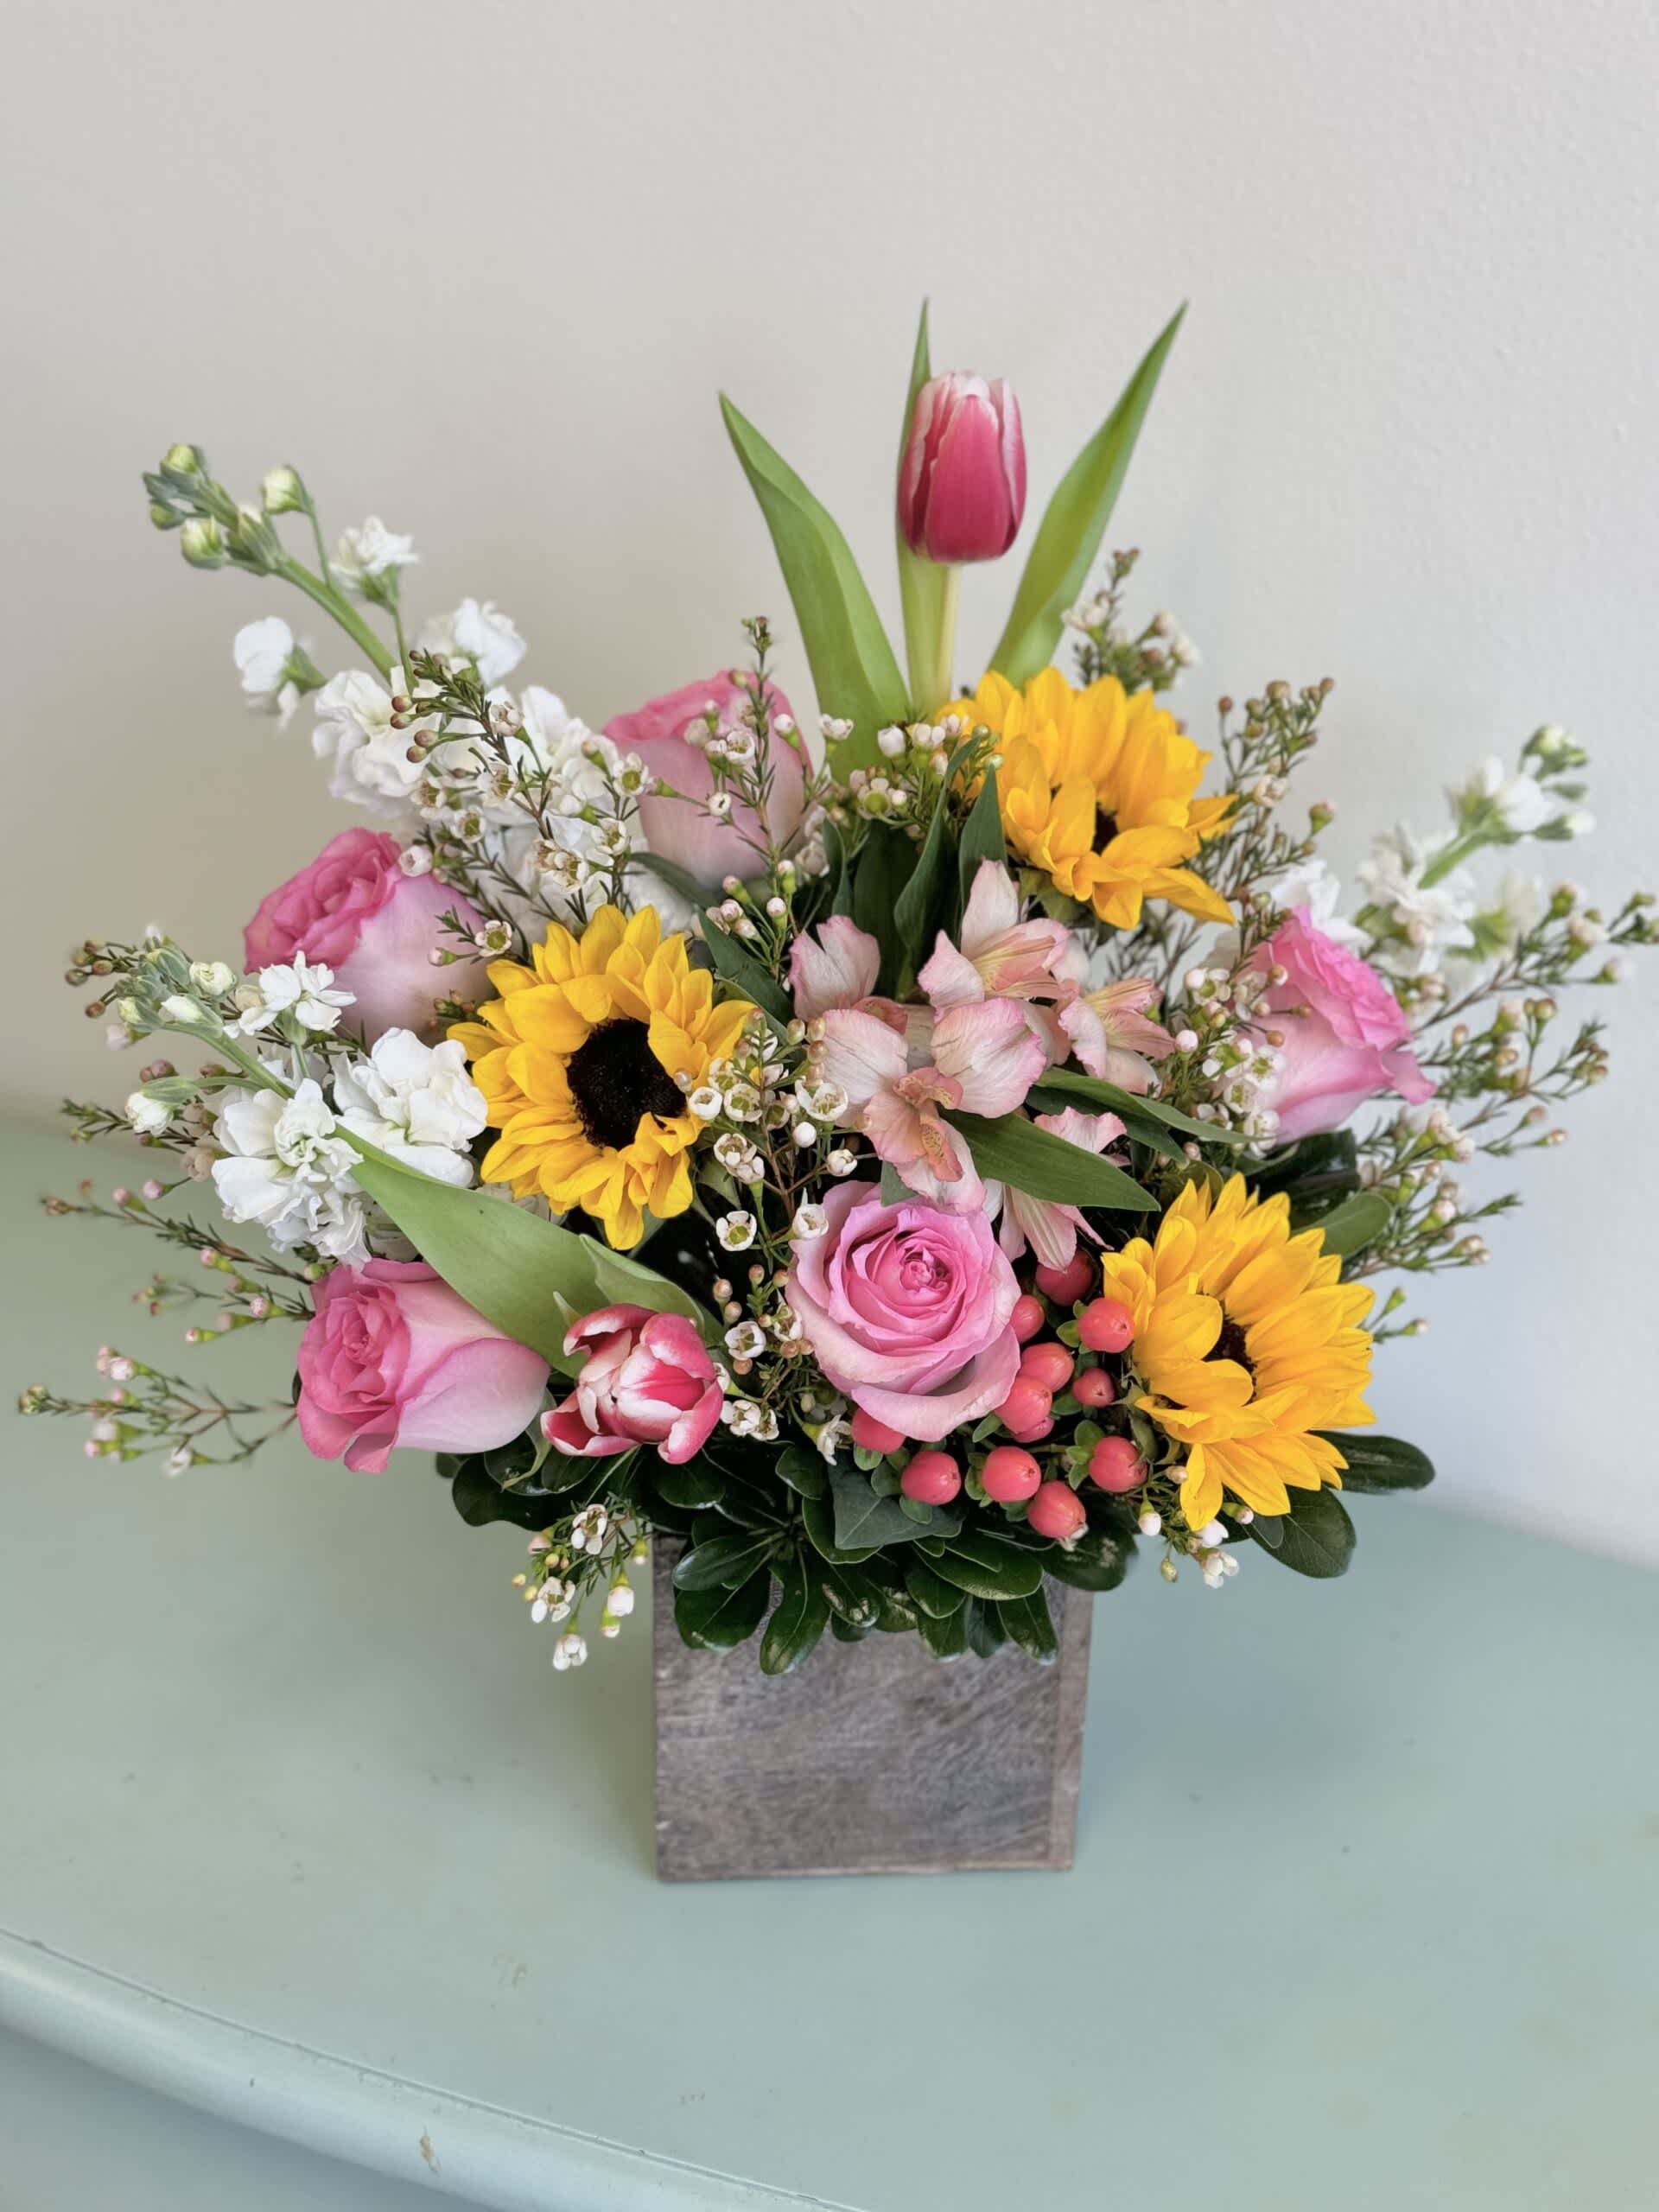 Sunny Garden - This beautiful garden arrangement is sure to put a smile on someone’s face!